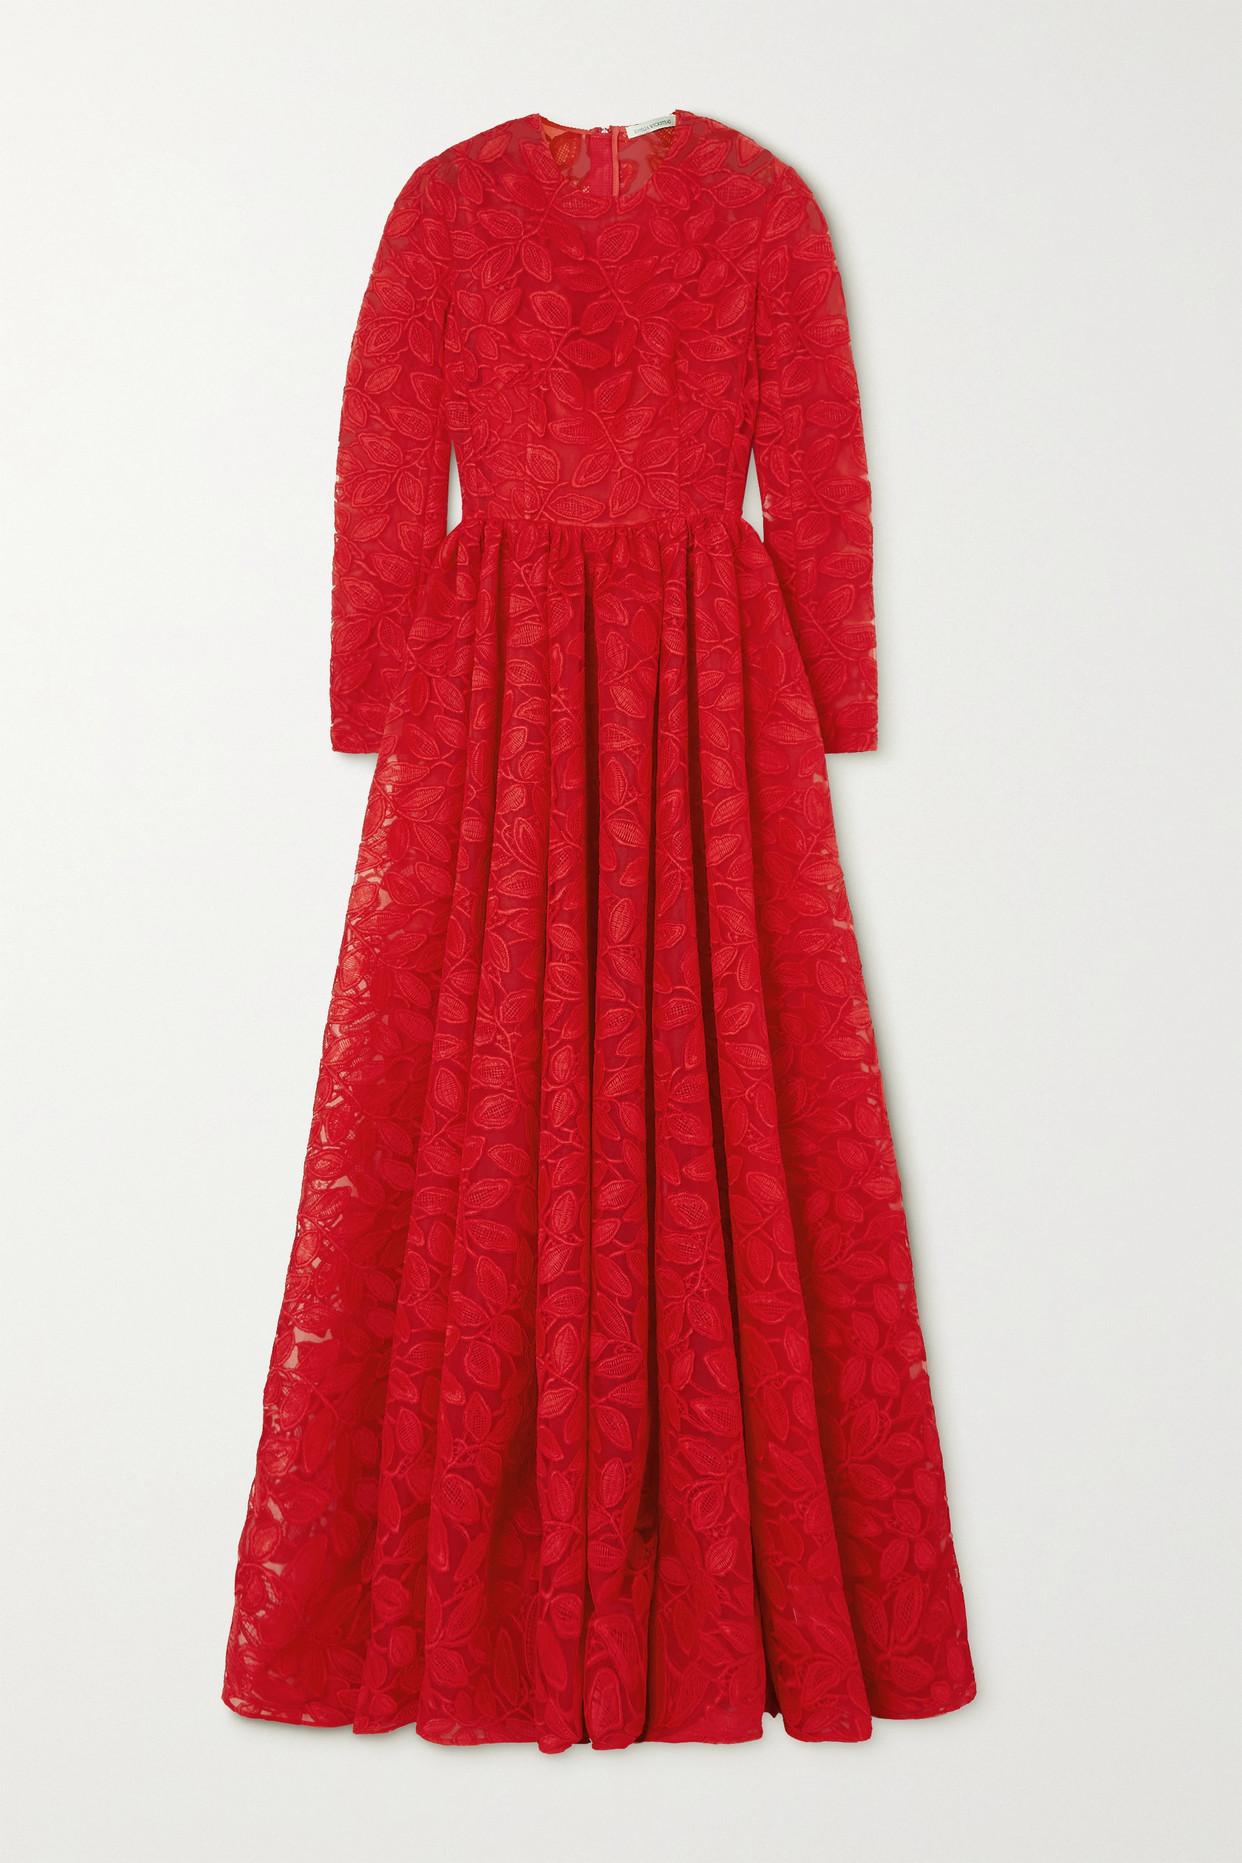 Emilia Wickstead Annette Tulle And Corded Lace Gown in Red | Lyst